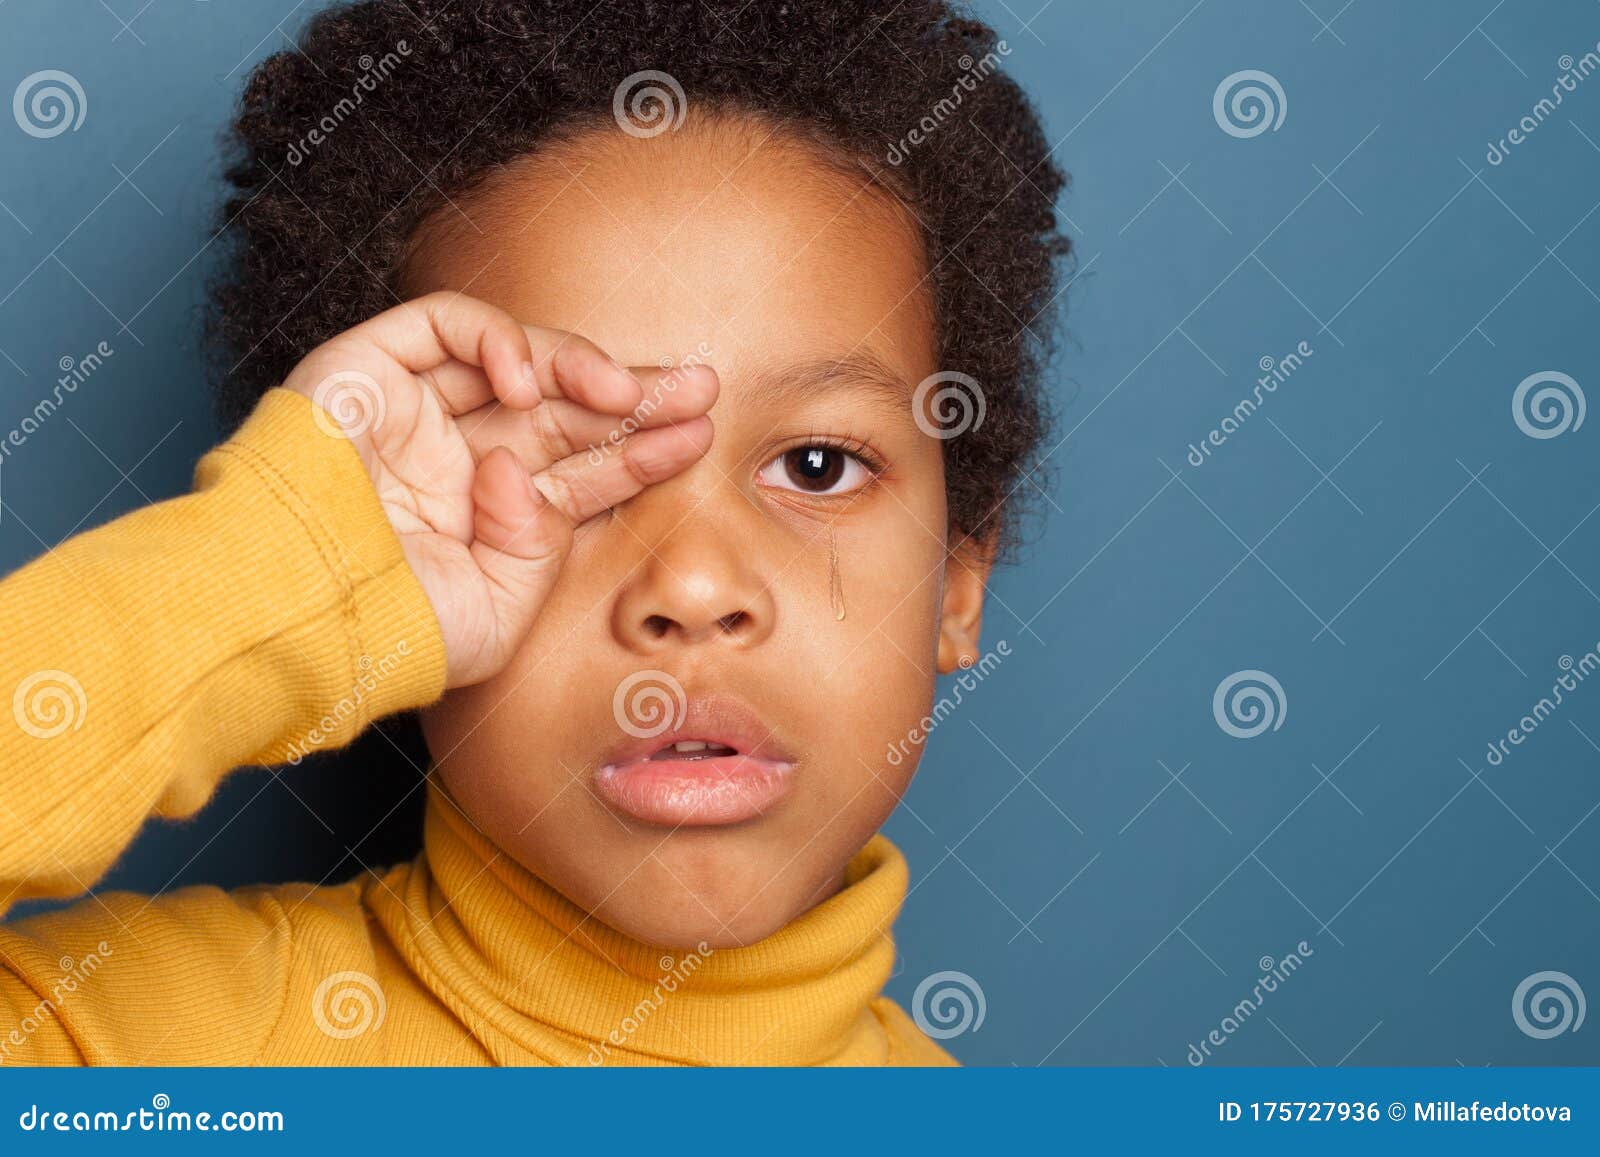 Crying Toddler Boy Stock Photo - Download Image Now - iStock